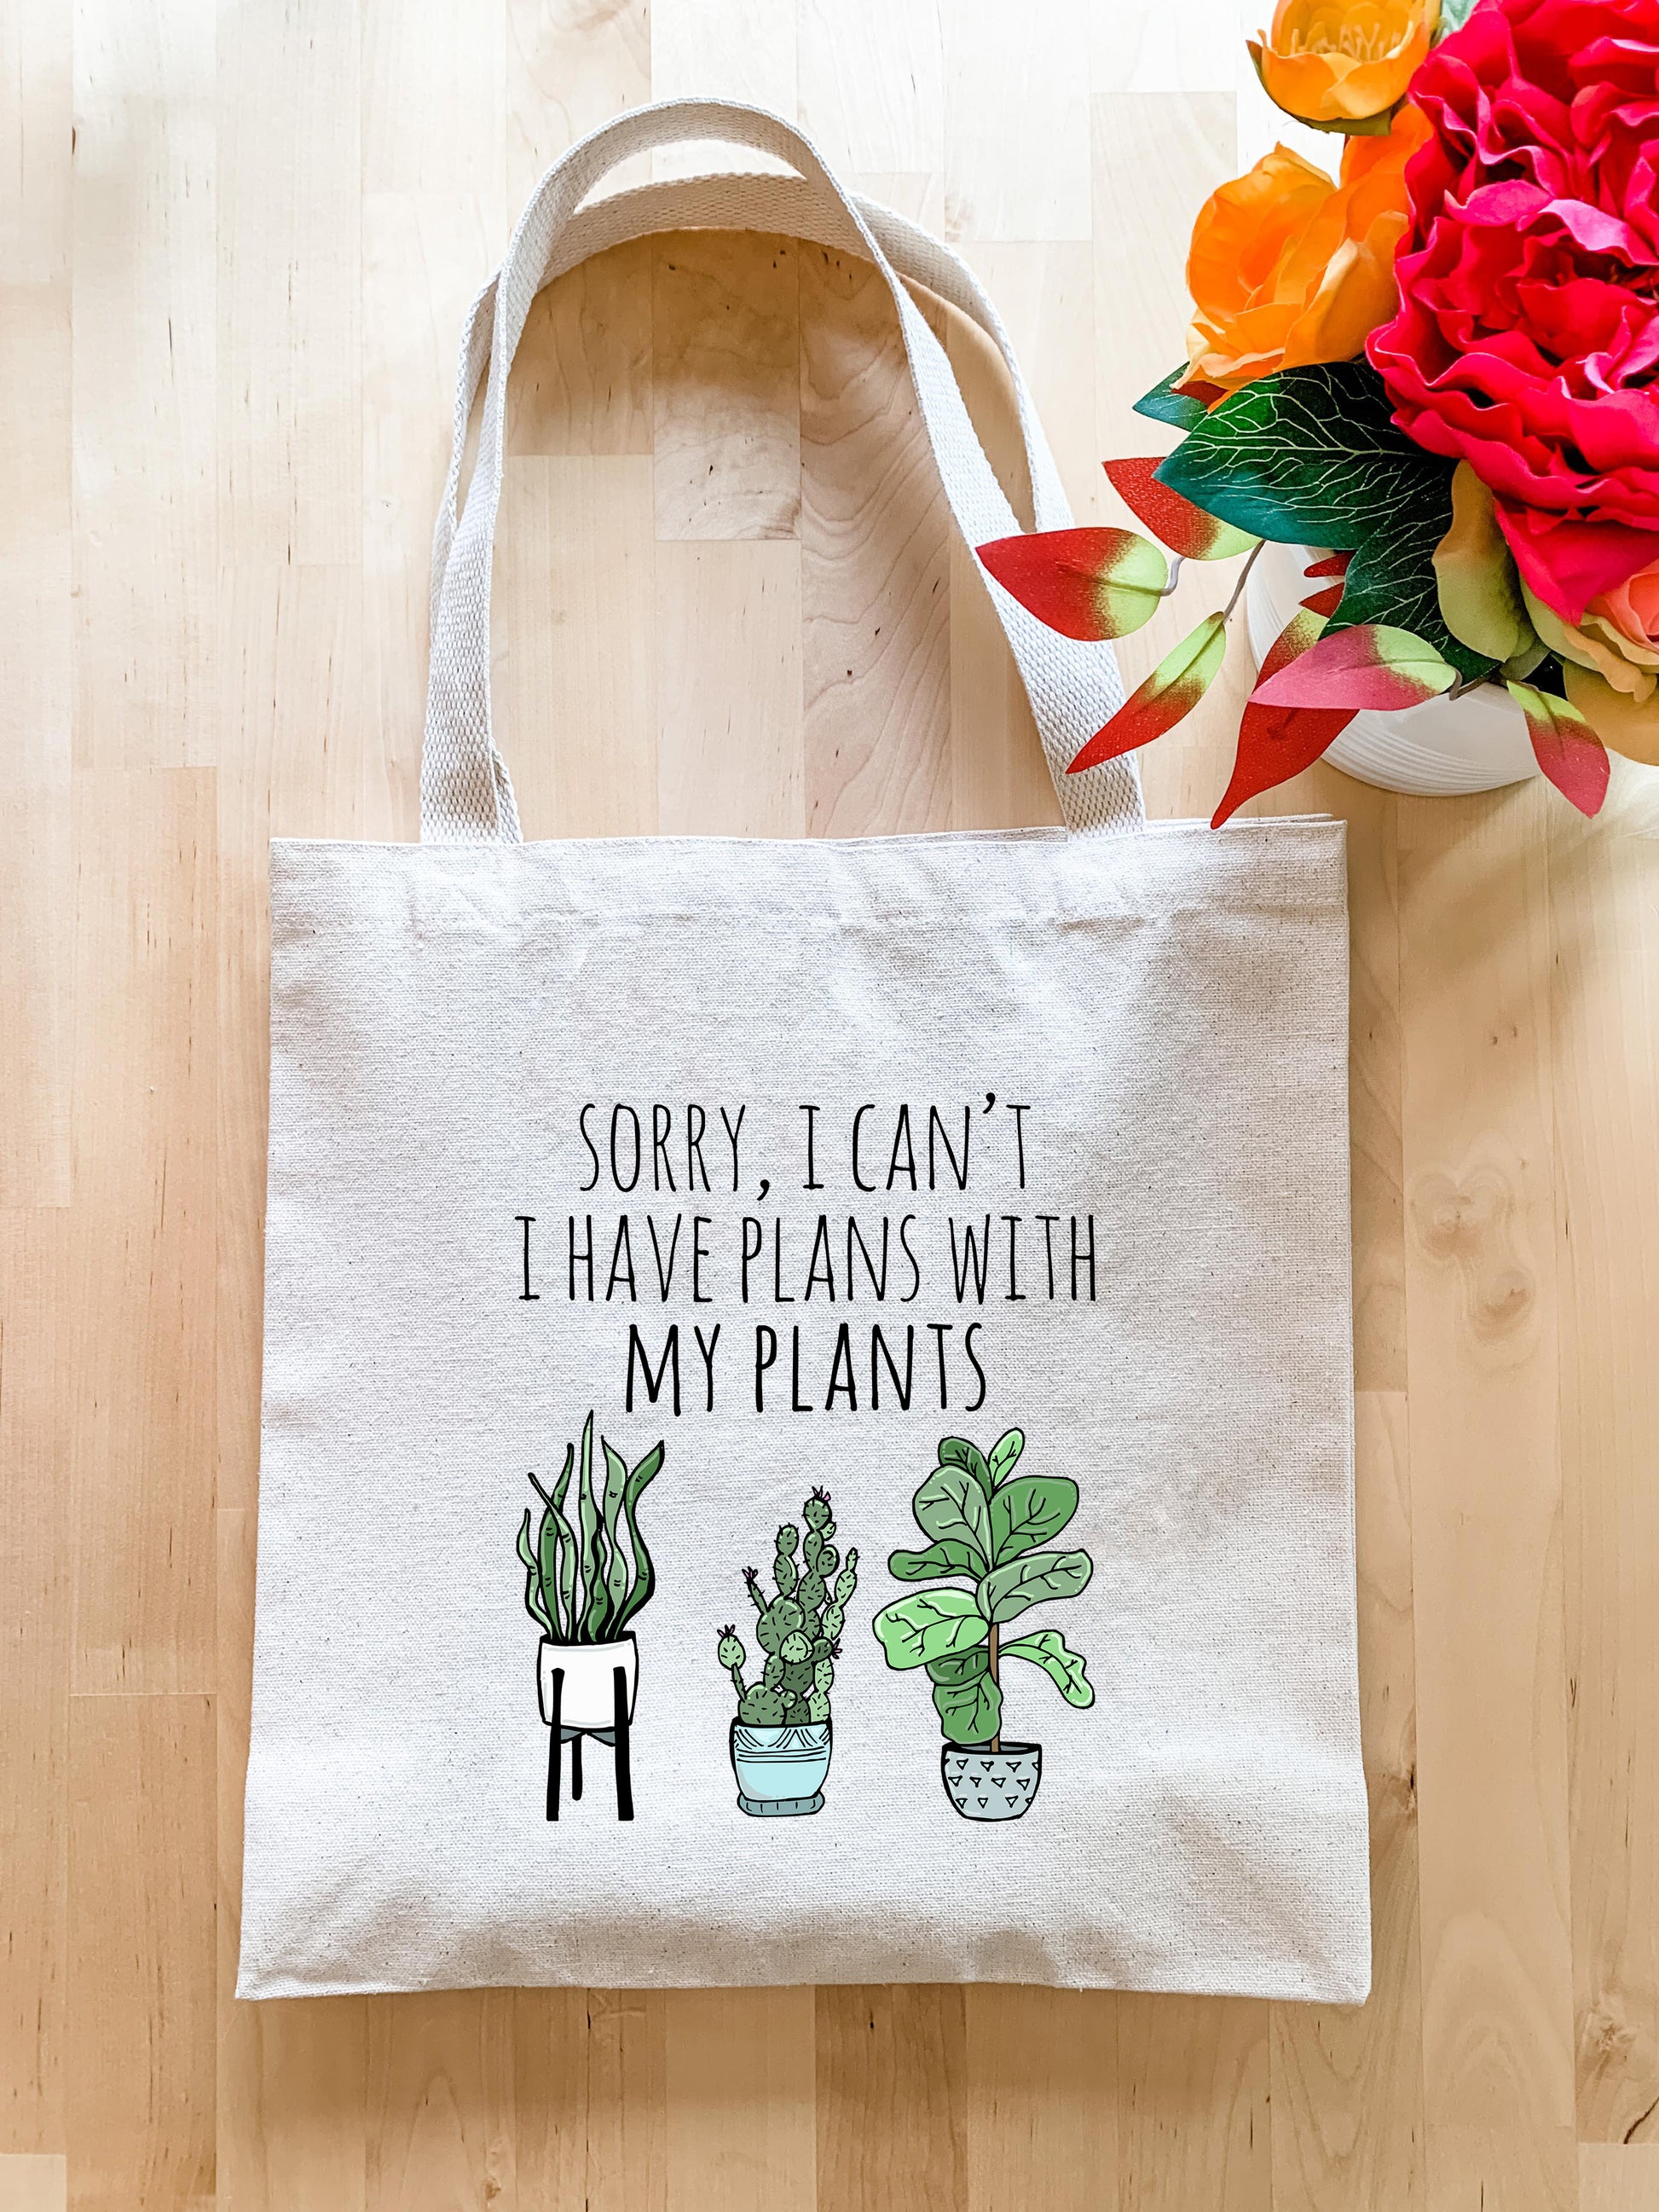 a tote bag that says sorry i can't have plans with my plants